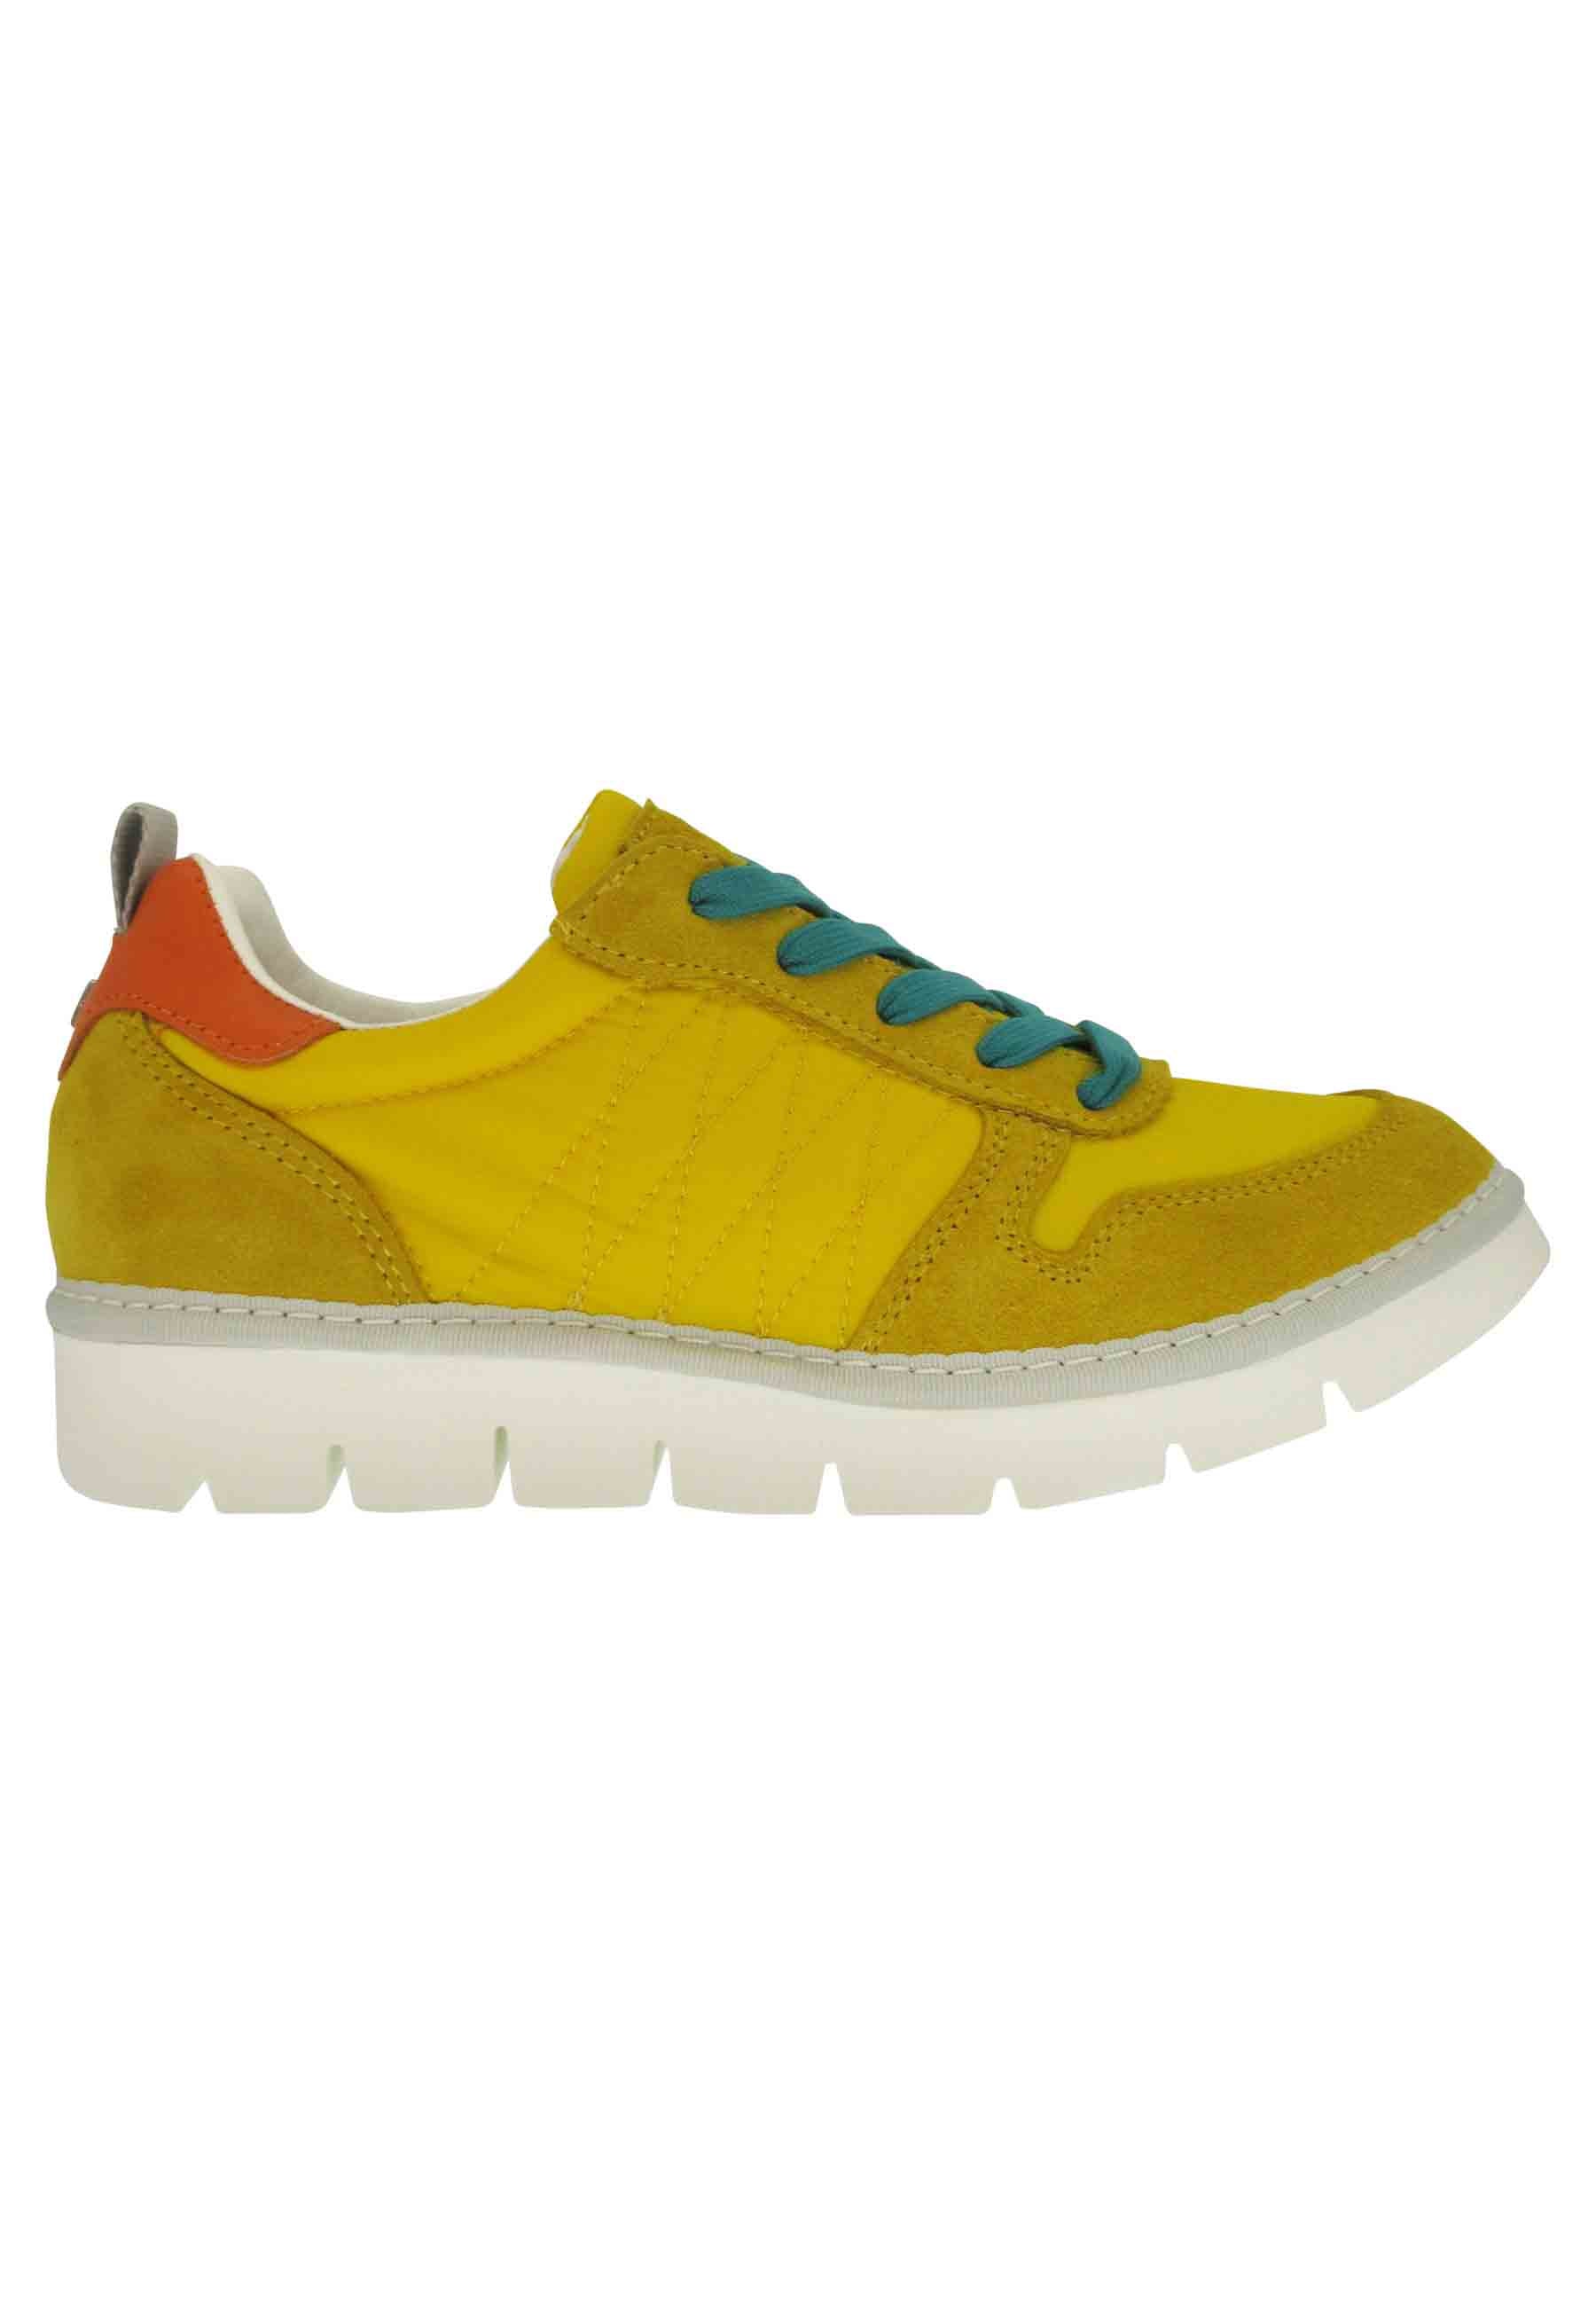 Women's sneakers in yellow fabric and suede with wedge sole